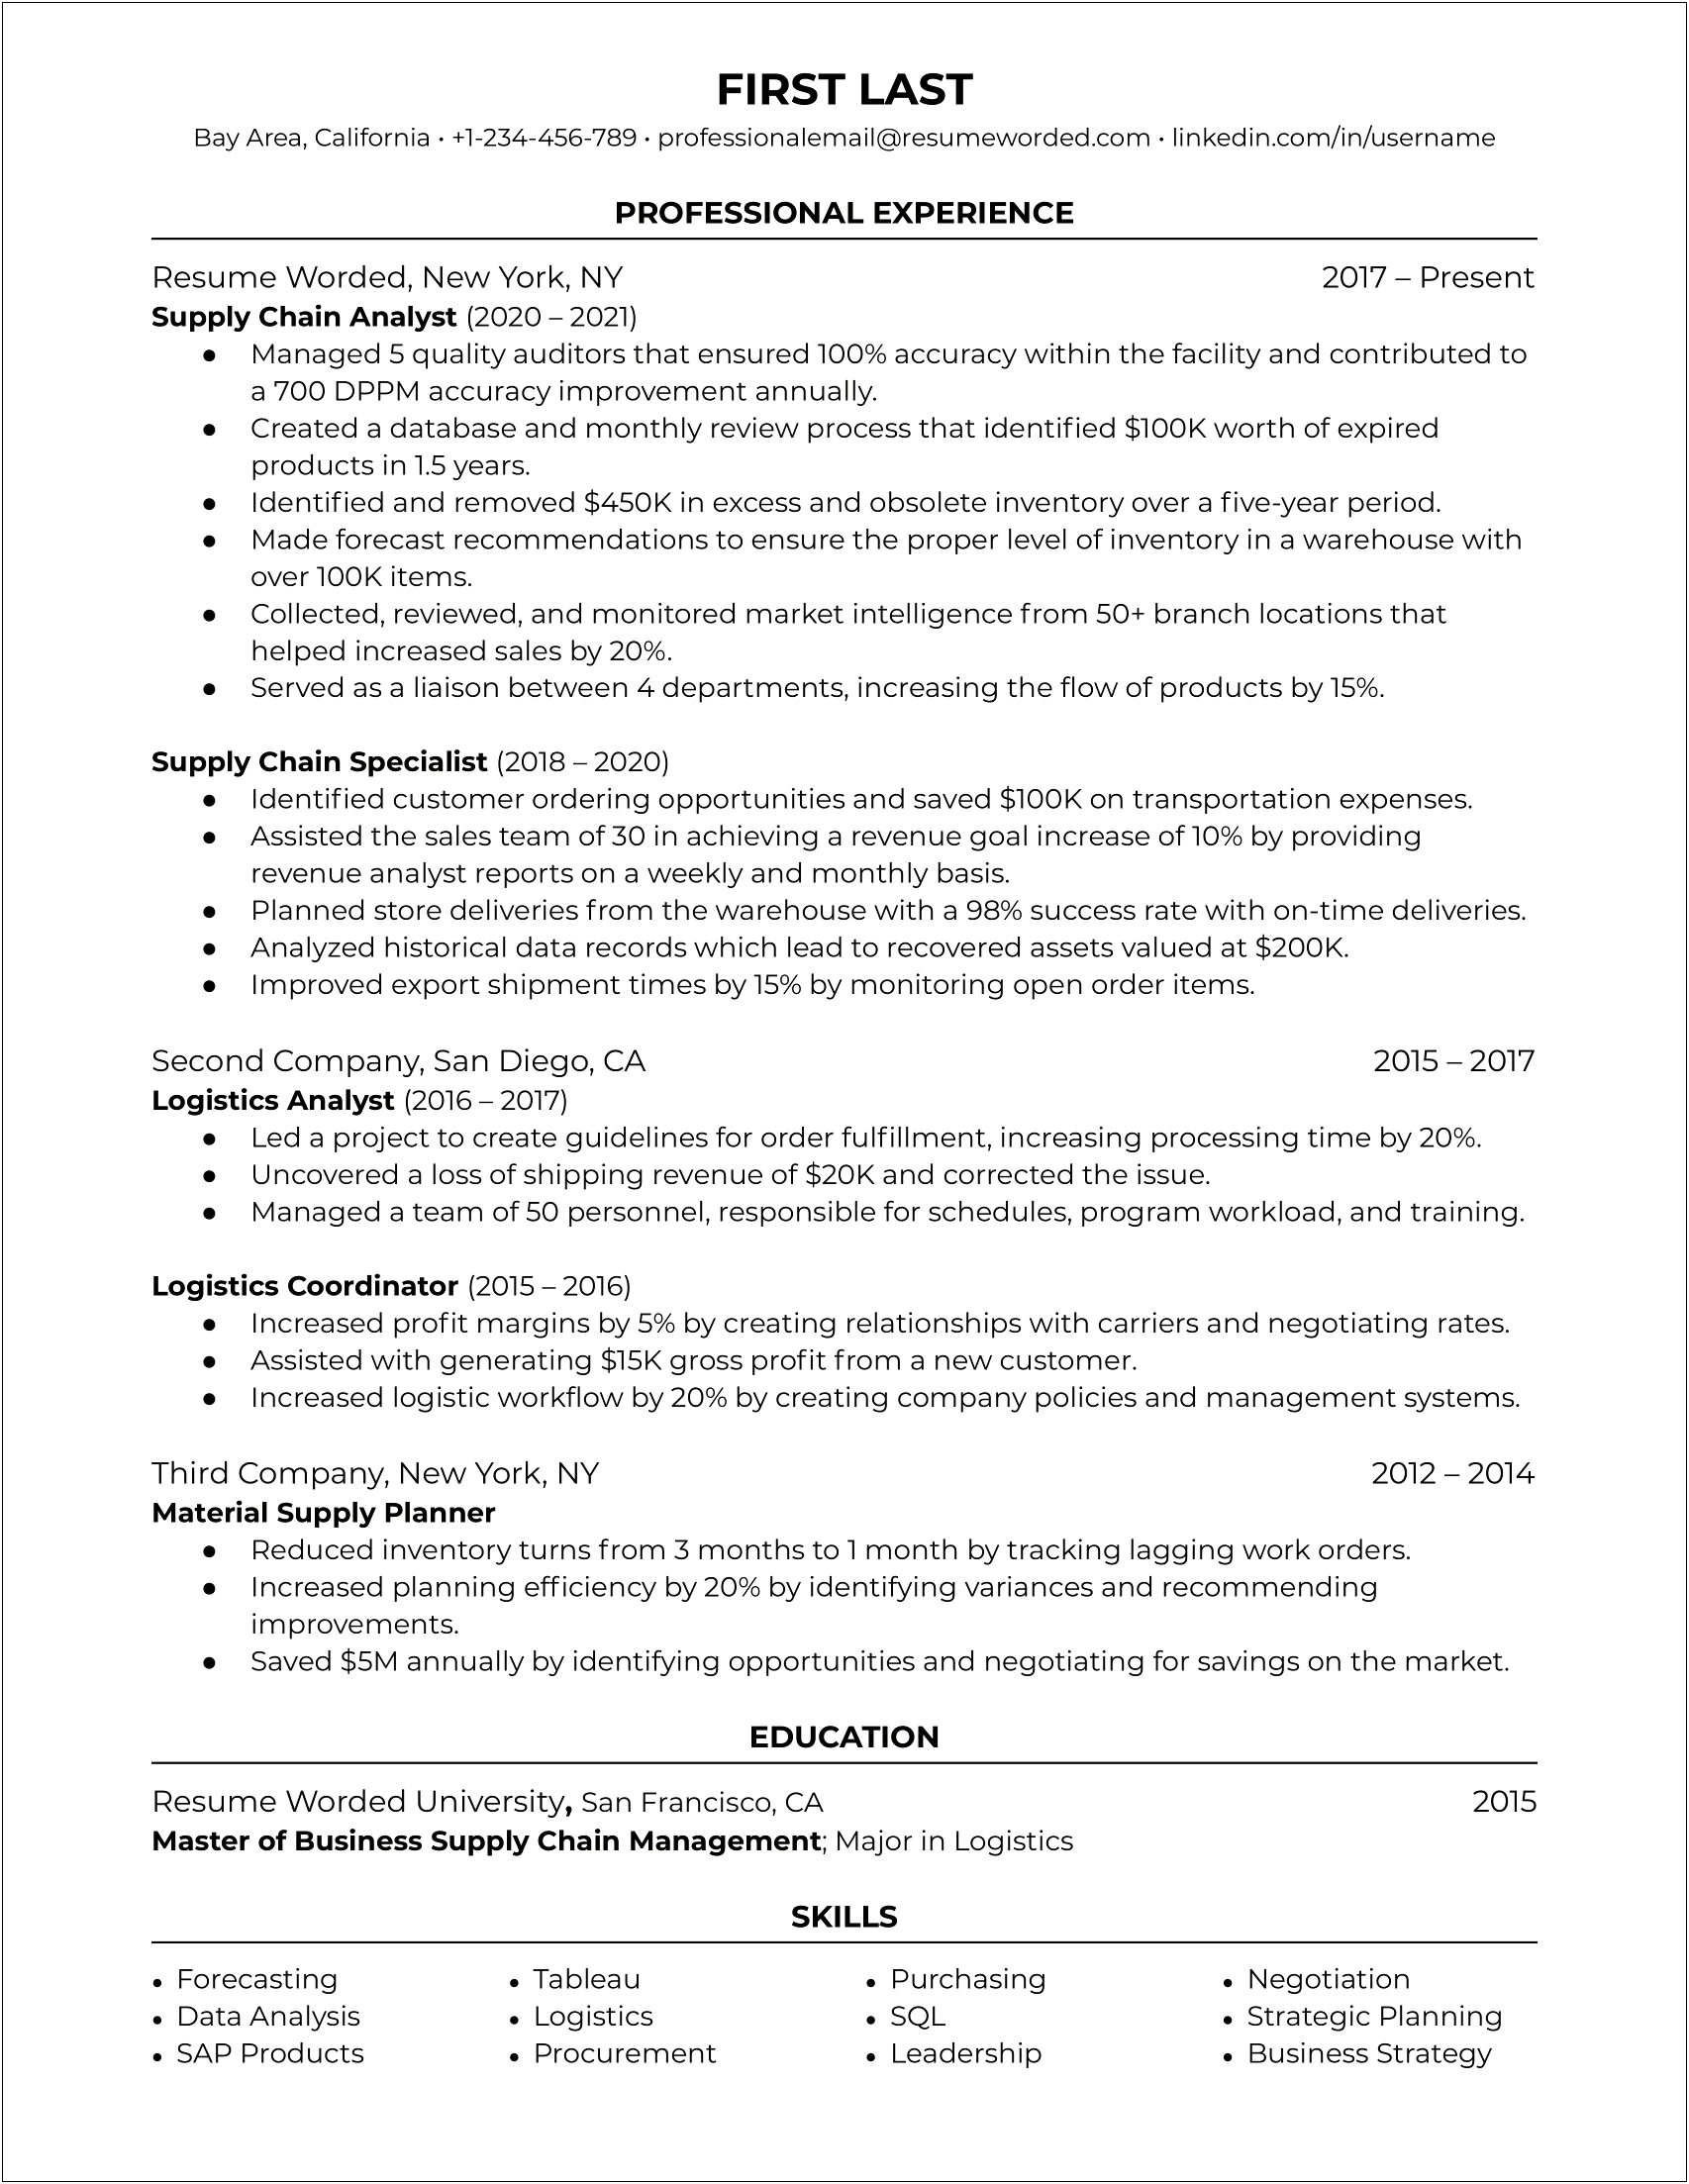 College Student Resume In Suply Chain Managment